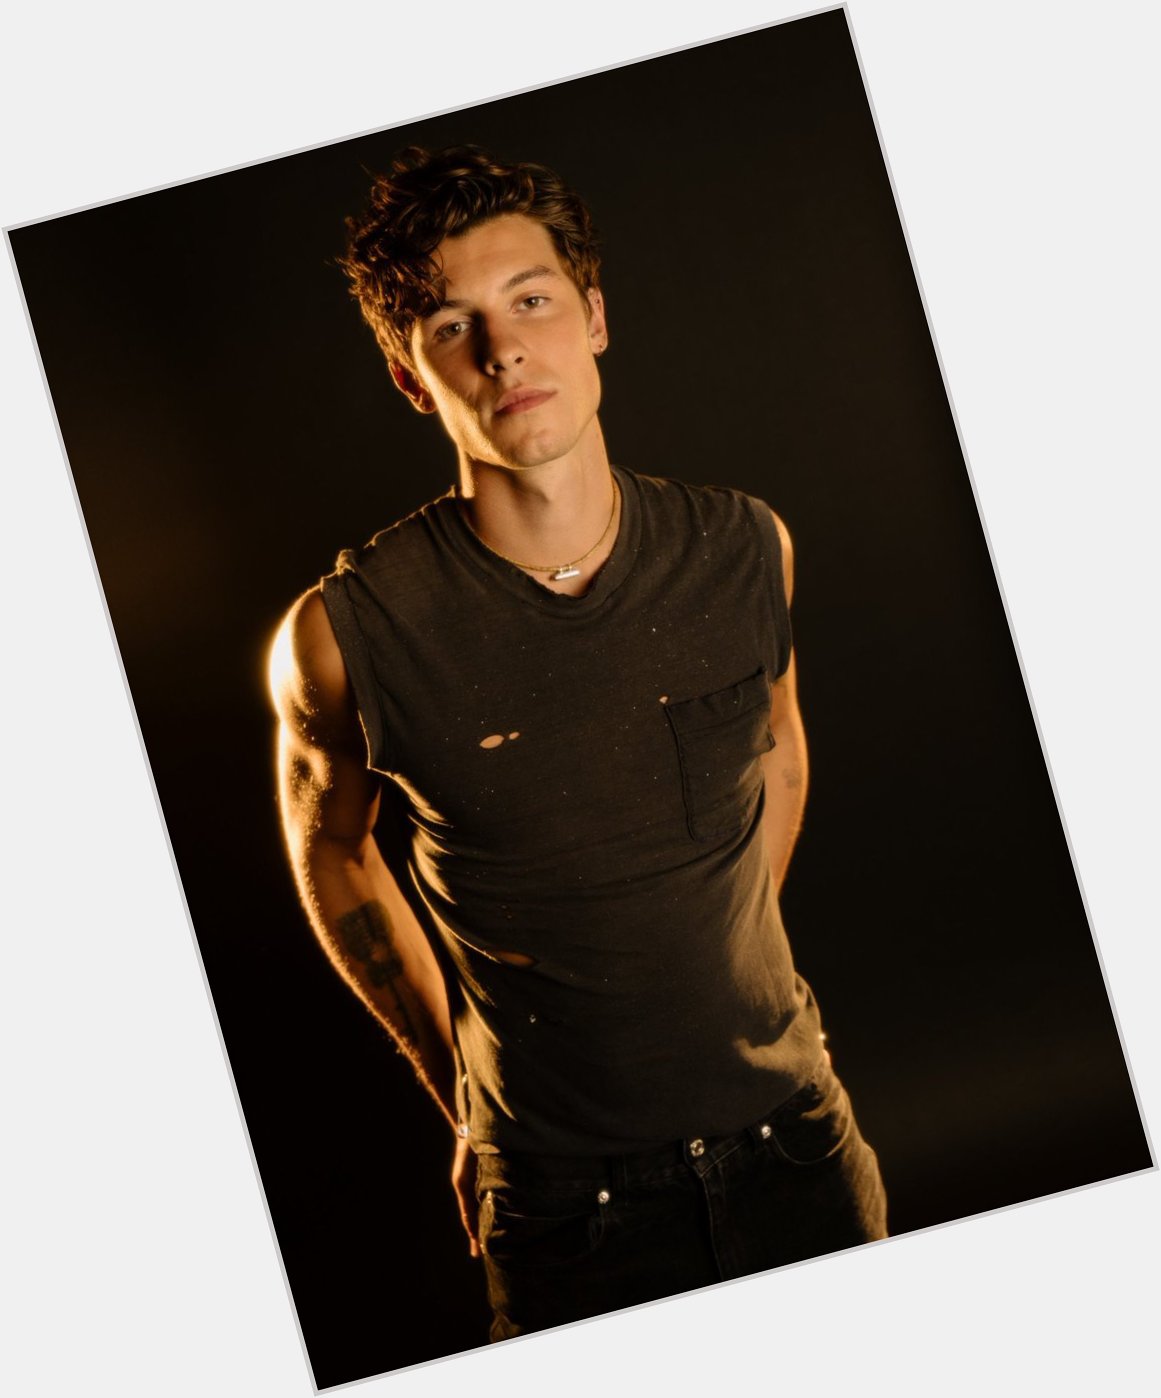 Happy 24th Birthday to Shawn Mendes!  